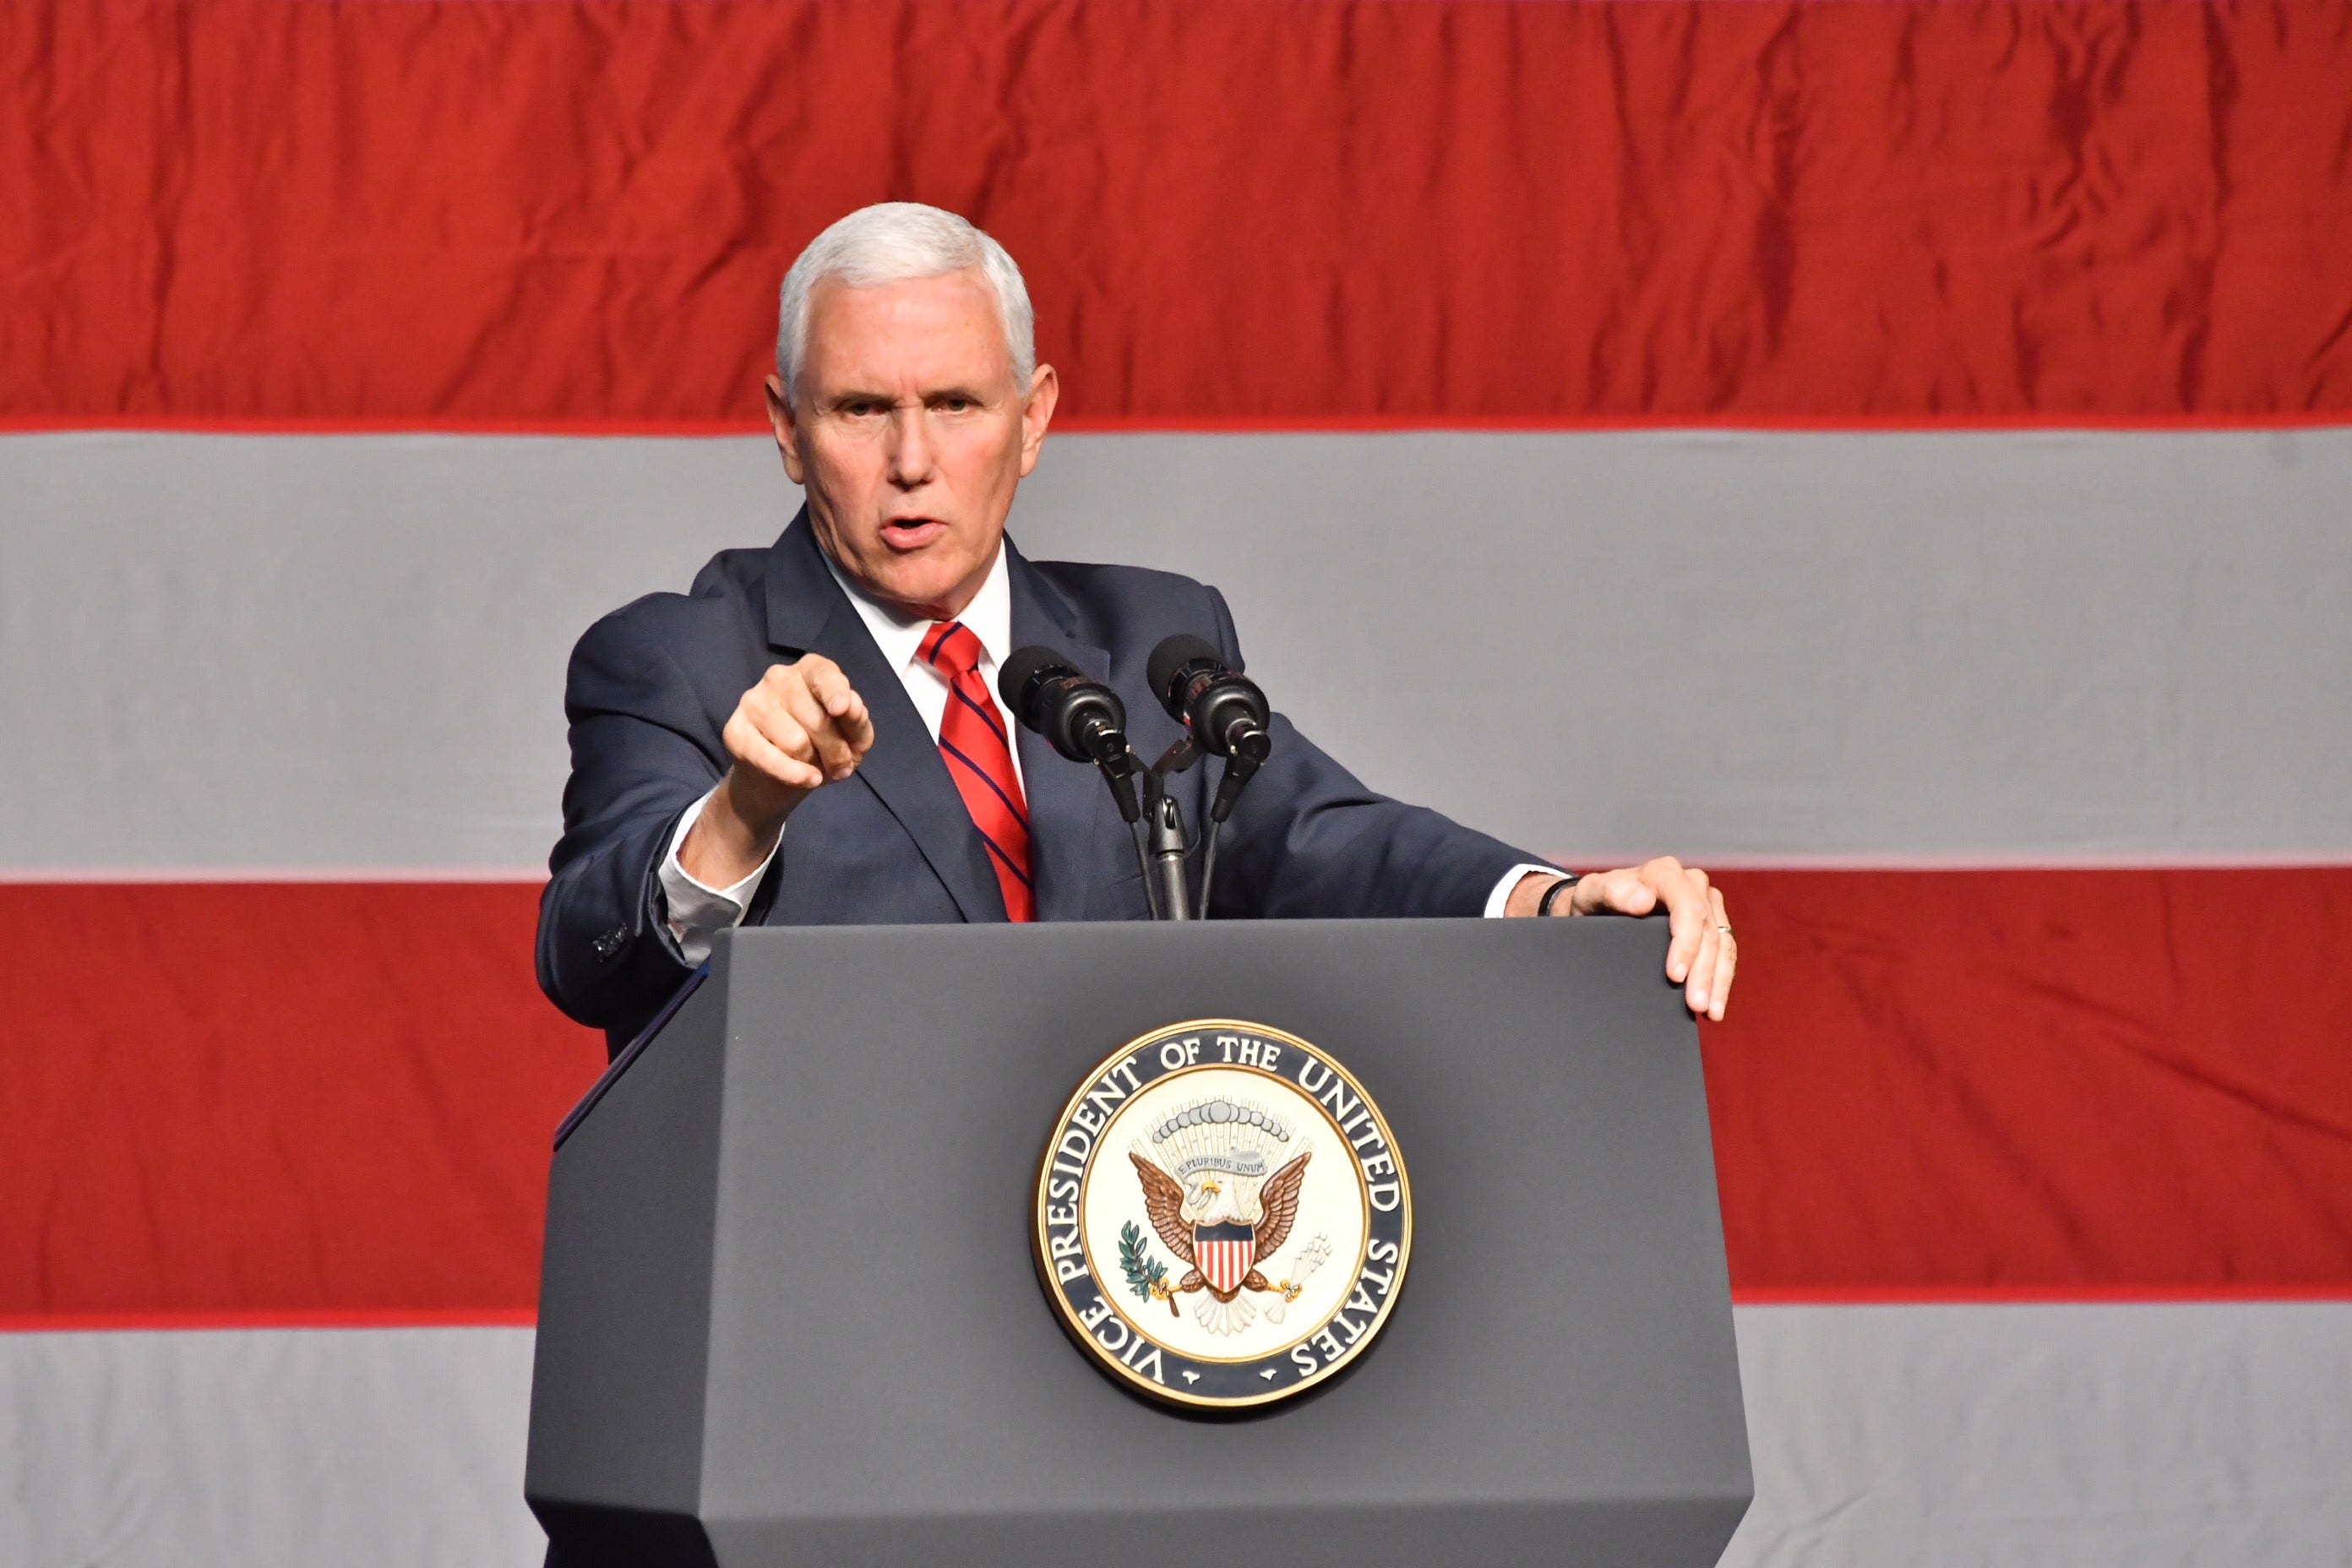 U.S. Vice President Mike Pence fires up the crowd as he campaigns with Republican candidates at the DeltaPlex in Grand Rapids on Monday, Oct 29, 2018.